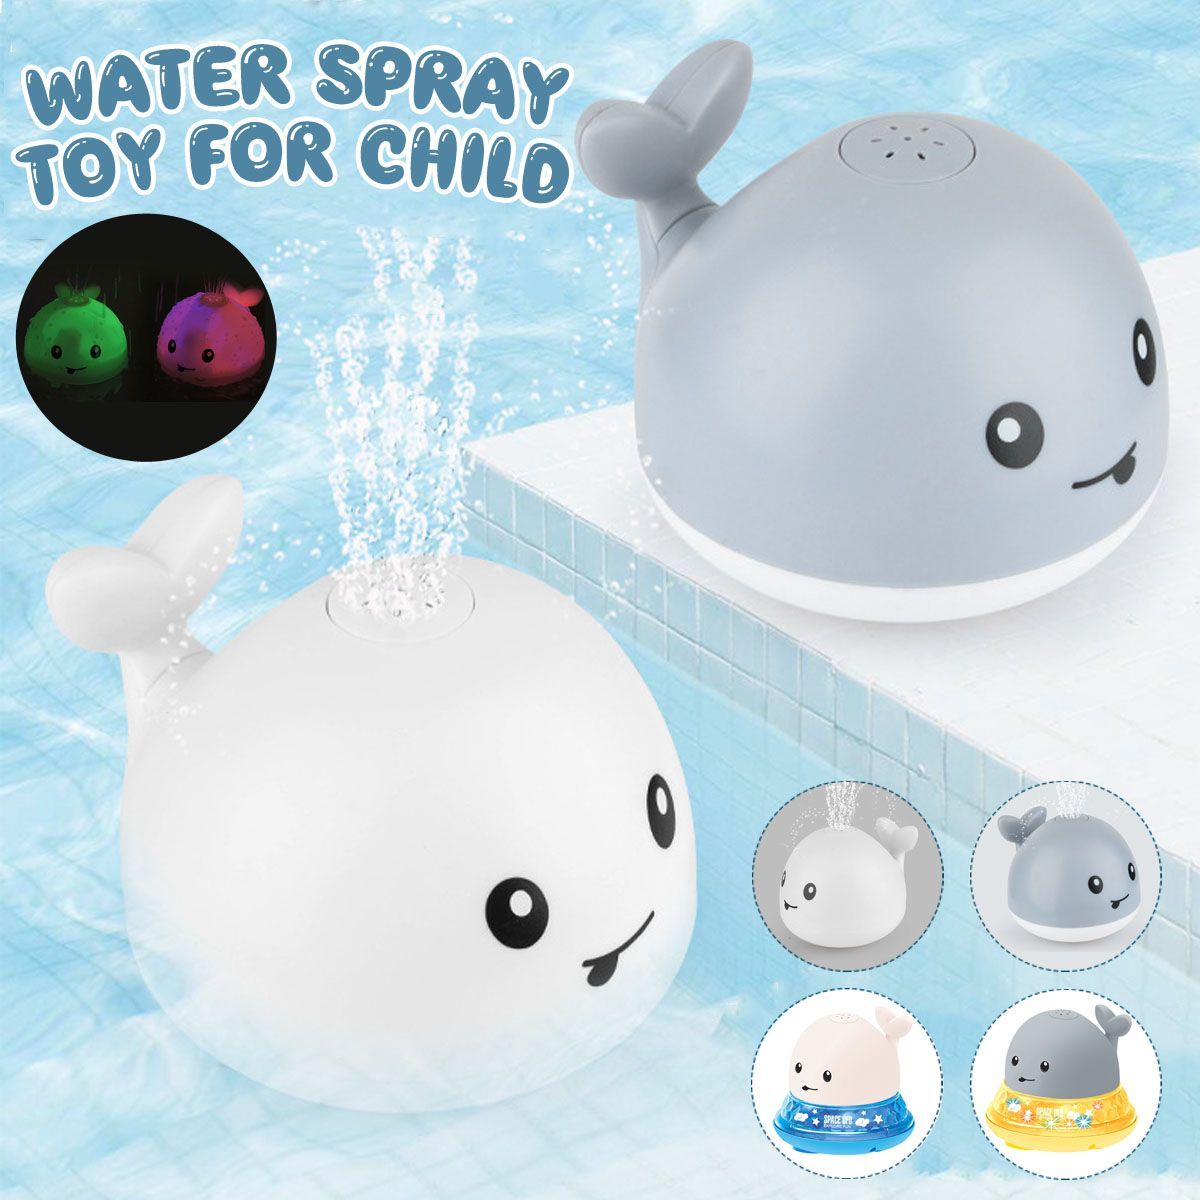 Small-Night-Light-Infant-Water-Spray-Ball-Bathroom-Baby-Bath-Toy-Electric-Induction-for-Children-1722293